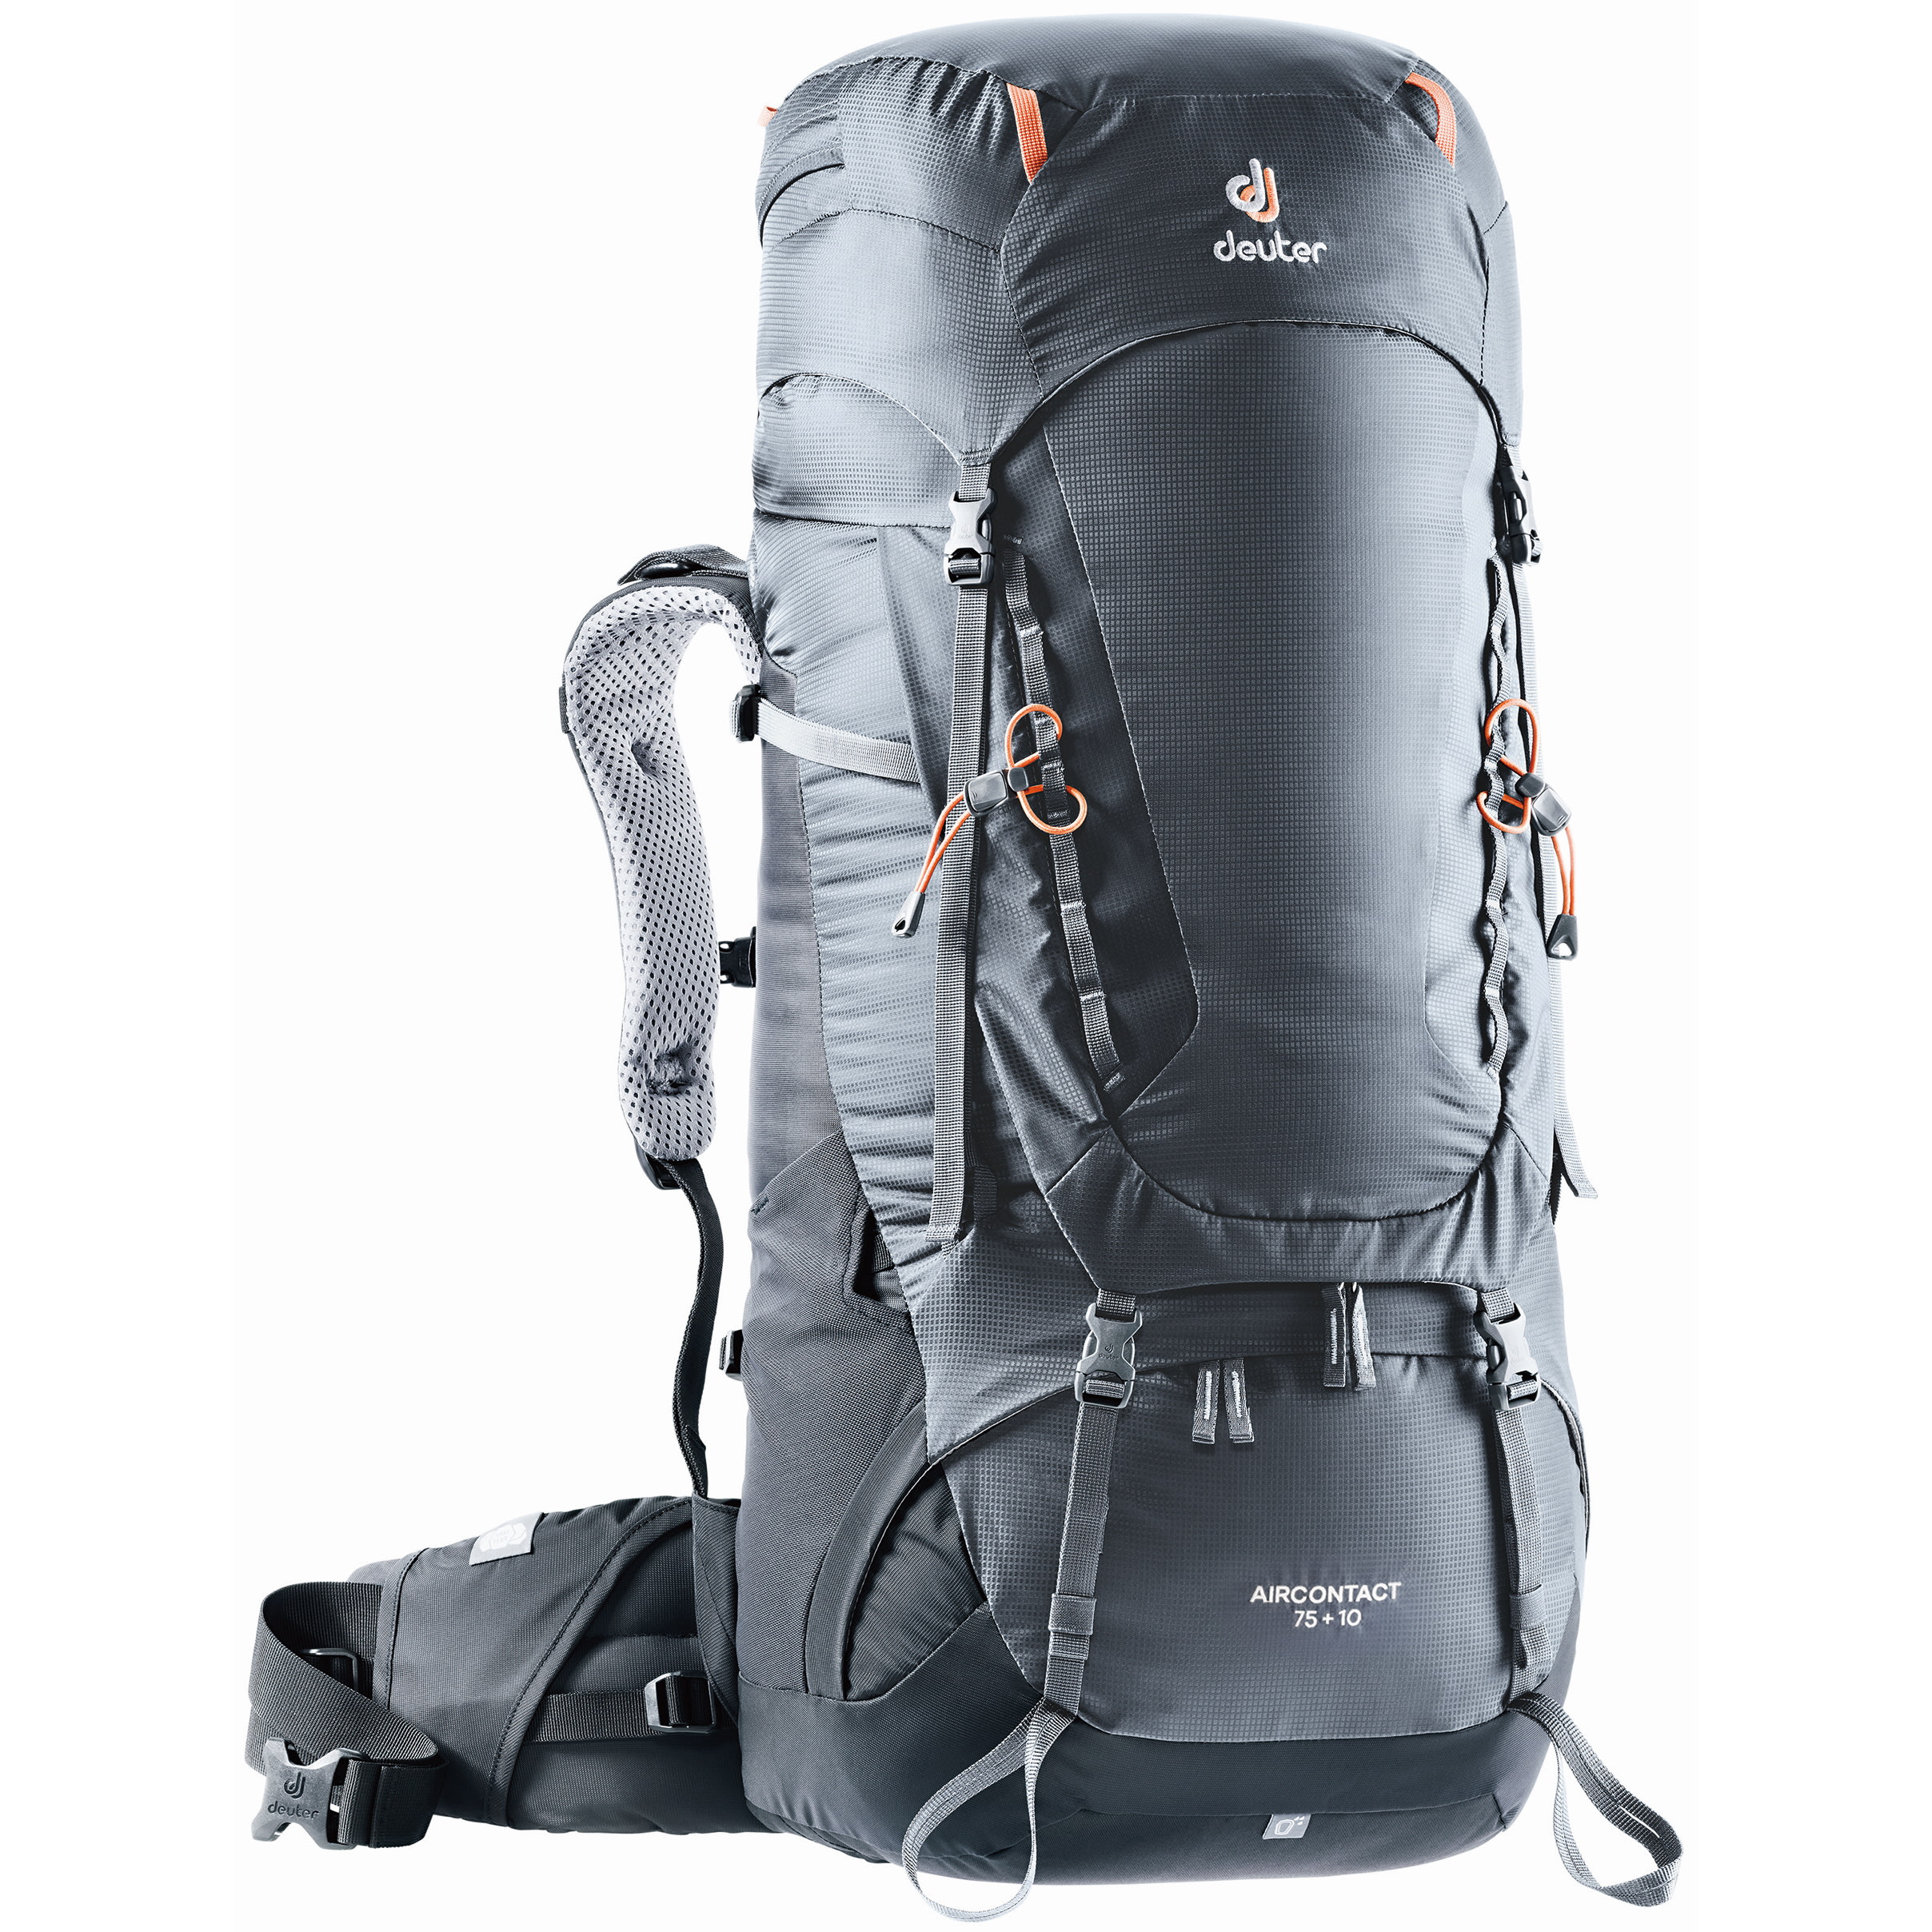 Buy Deuter 75+10 from Outnorth